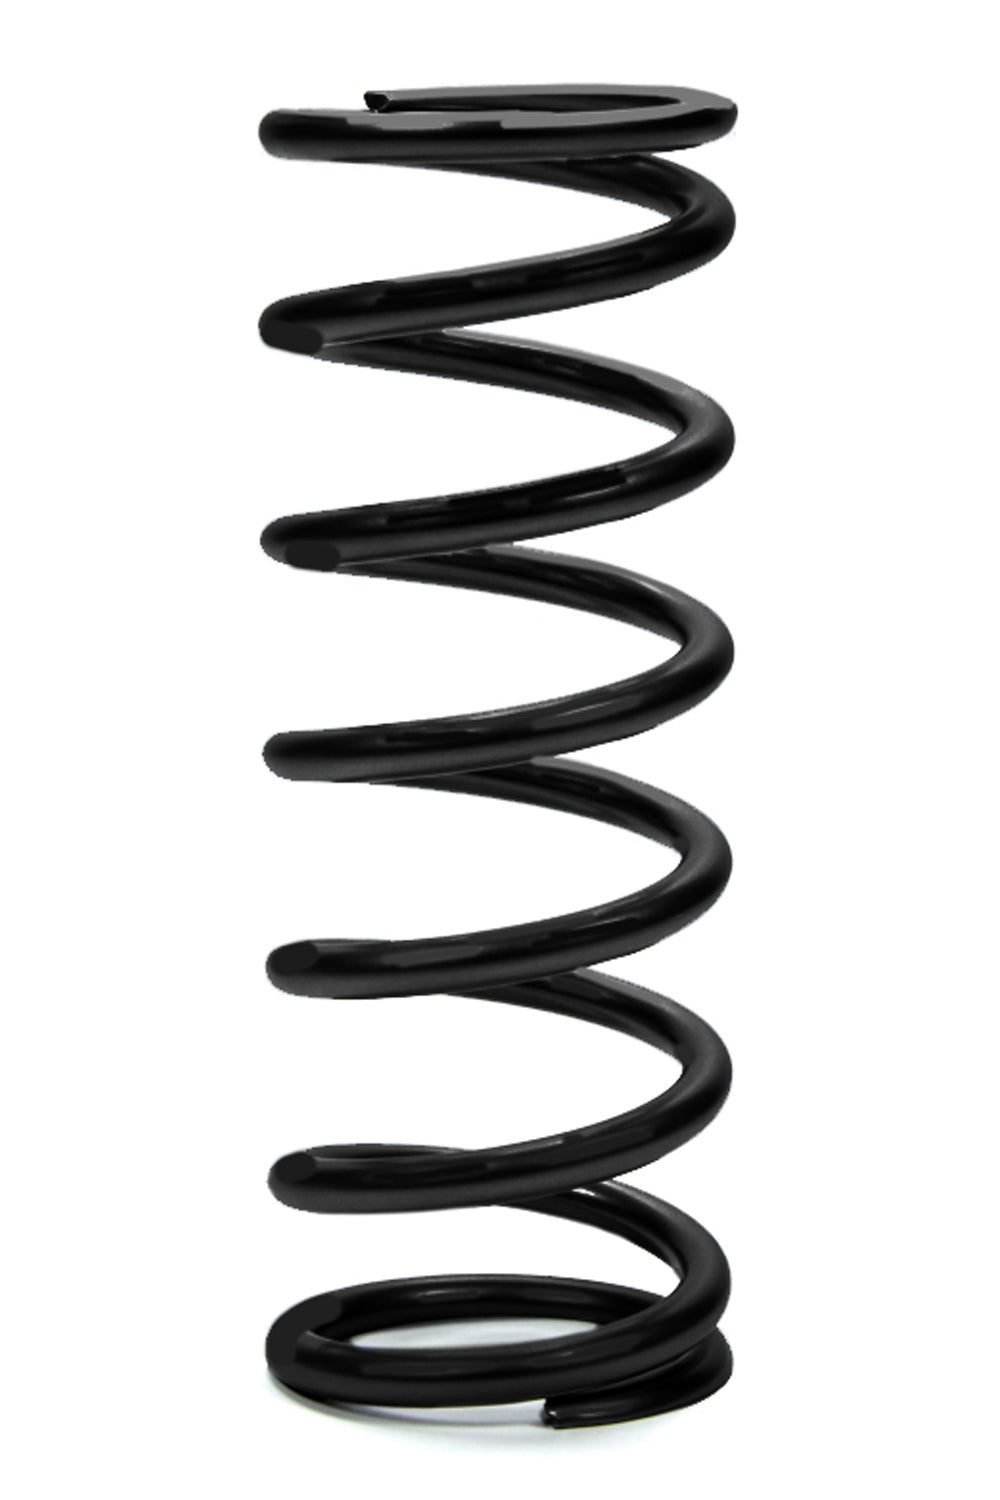 Swift Spring Conv. High Travel 9.5in x 5in x 450lb Springs and Components Coil Springs main image